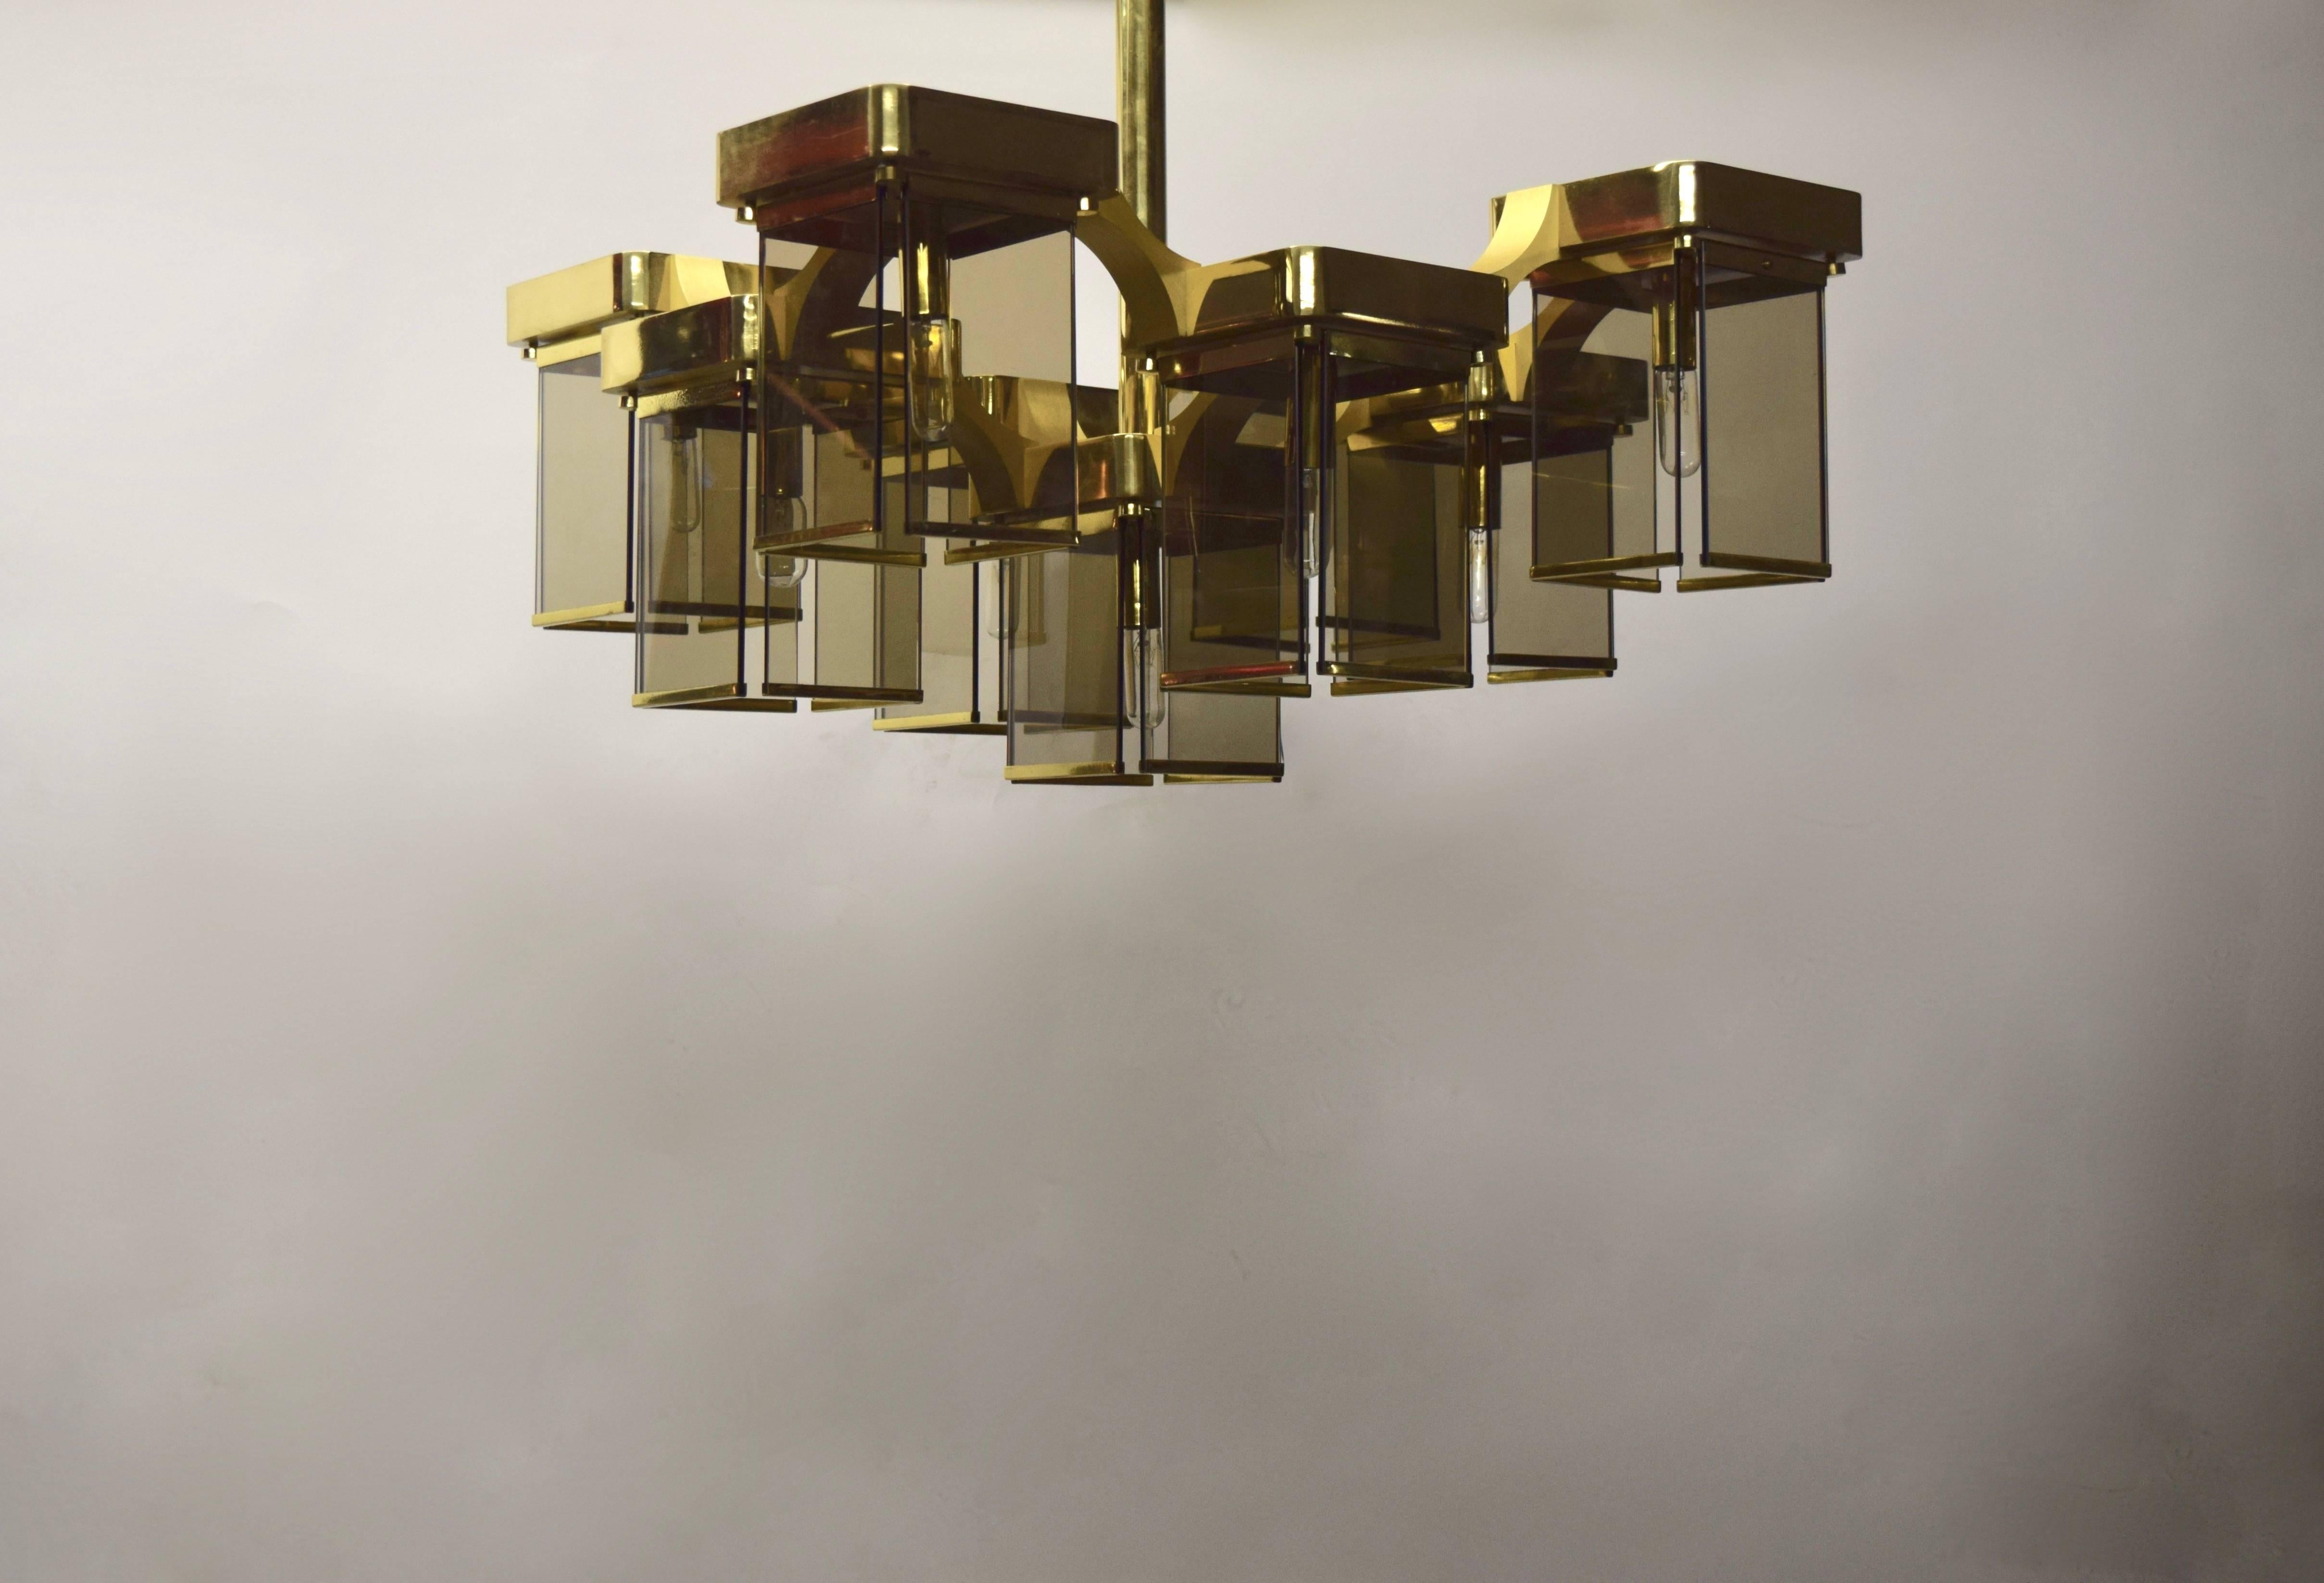 Sciolari ceiling fixture has nine lights and comprises panels of bronze smoked glass and brass plated steel and aluminium hardware. Each light is connected by arching brushed brass finished supports and has one candelabra based socket. 
The